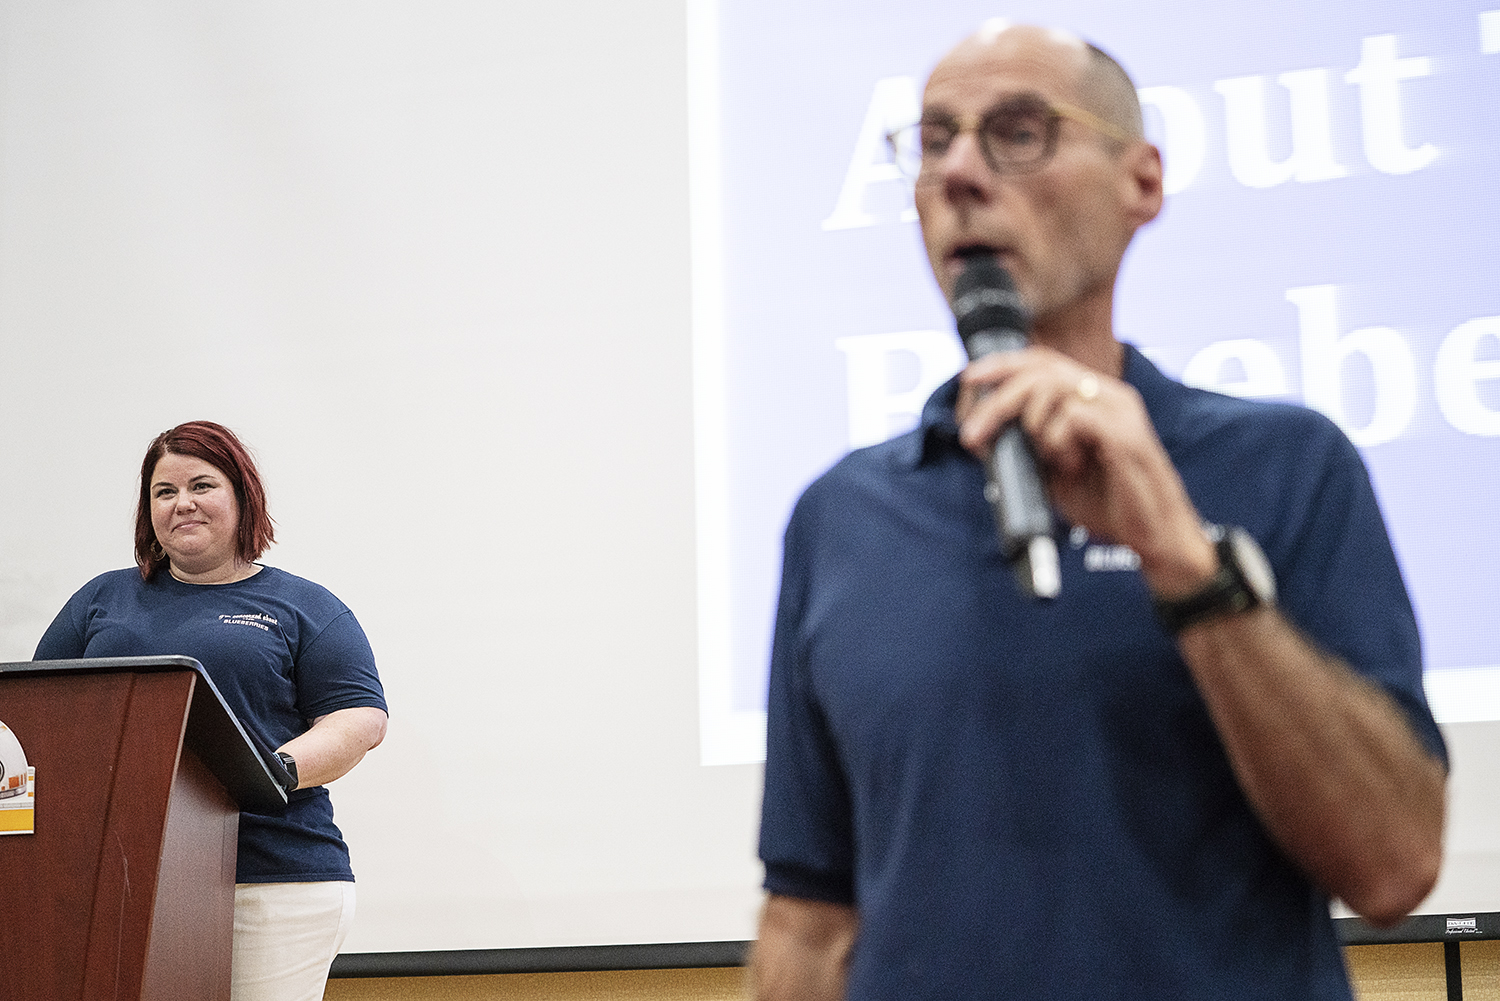 Flint, MI - Friday, May 4, 2018: FlintSide publisher and Flint resident Marjory Raymer, 44 (left) watches as Blueberry Founder and Fenton Twp. resident Phil Shaltz, 69, speaks to the Blueberry Ambassadors during the 5th Annual Blueberry Ambassador Aw